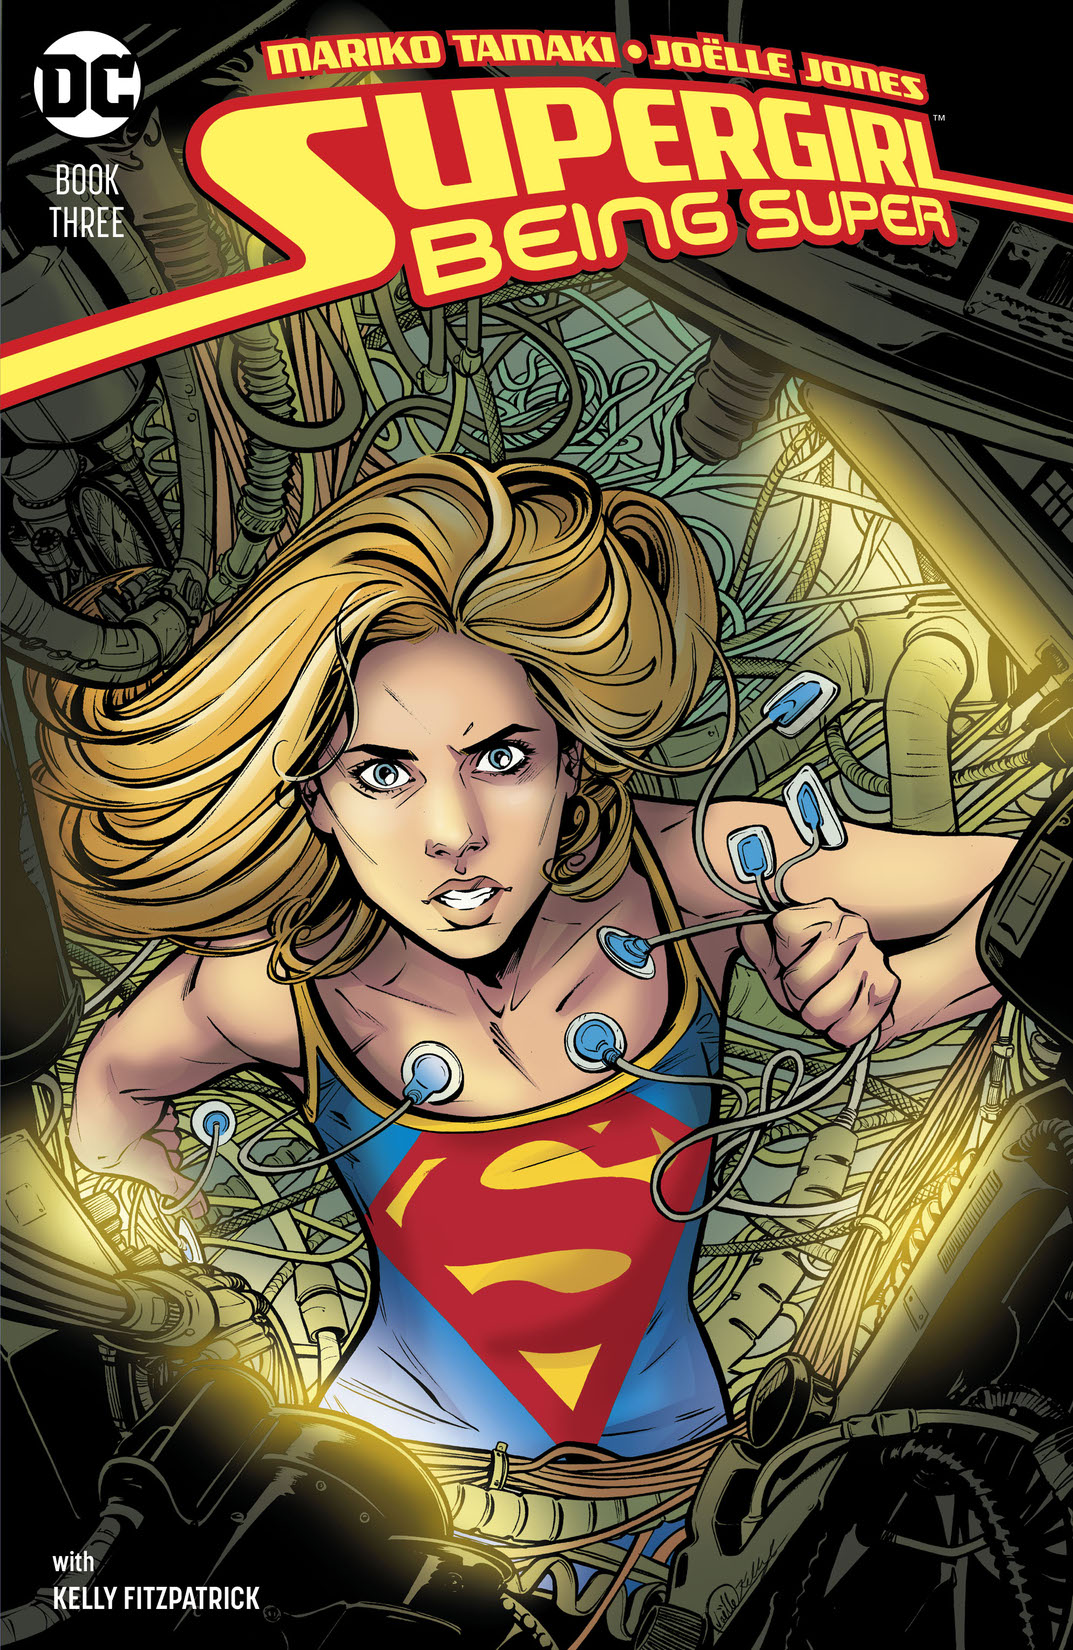 Supergirl: Being Super #3 preview images